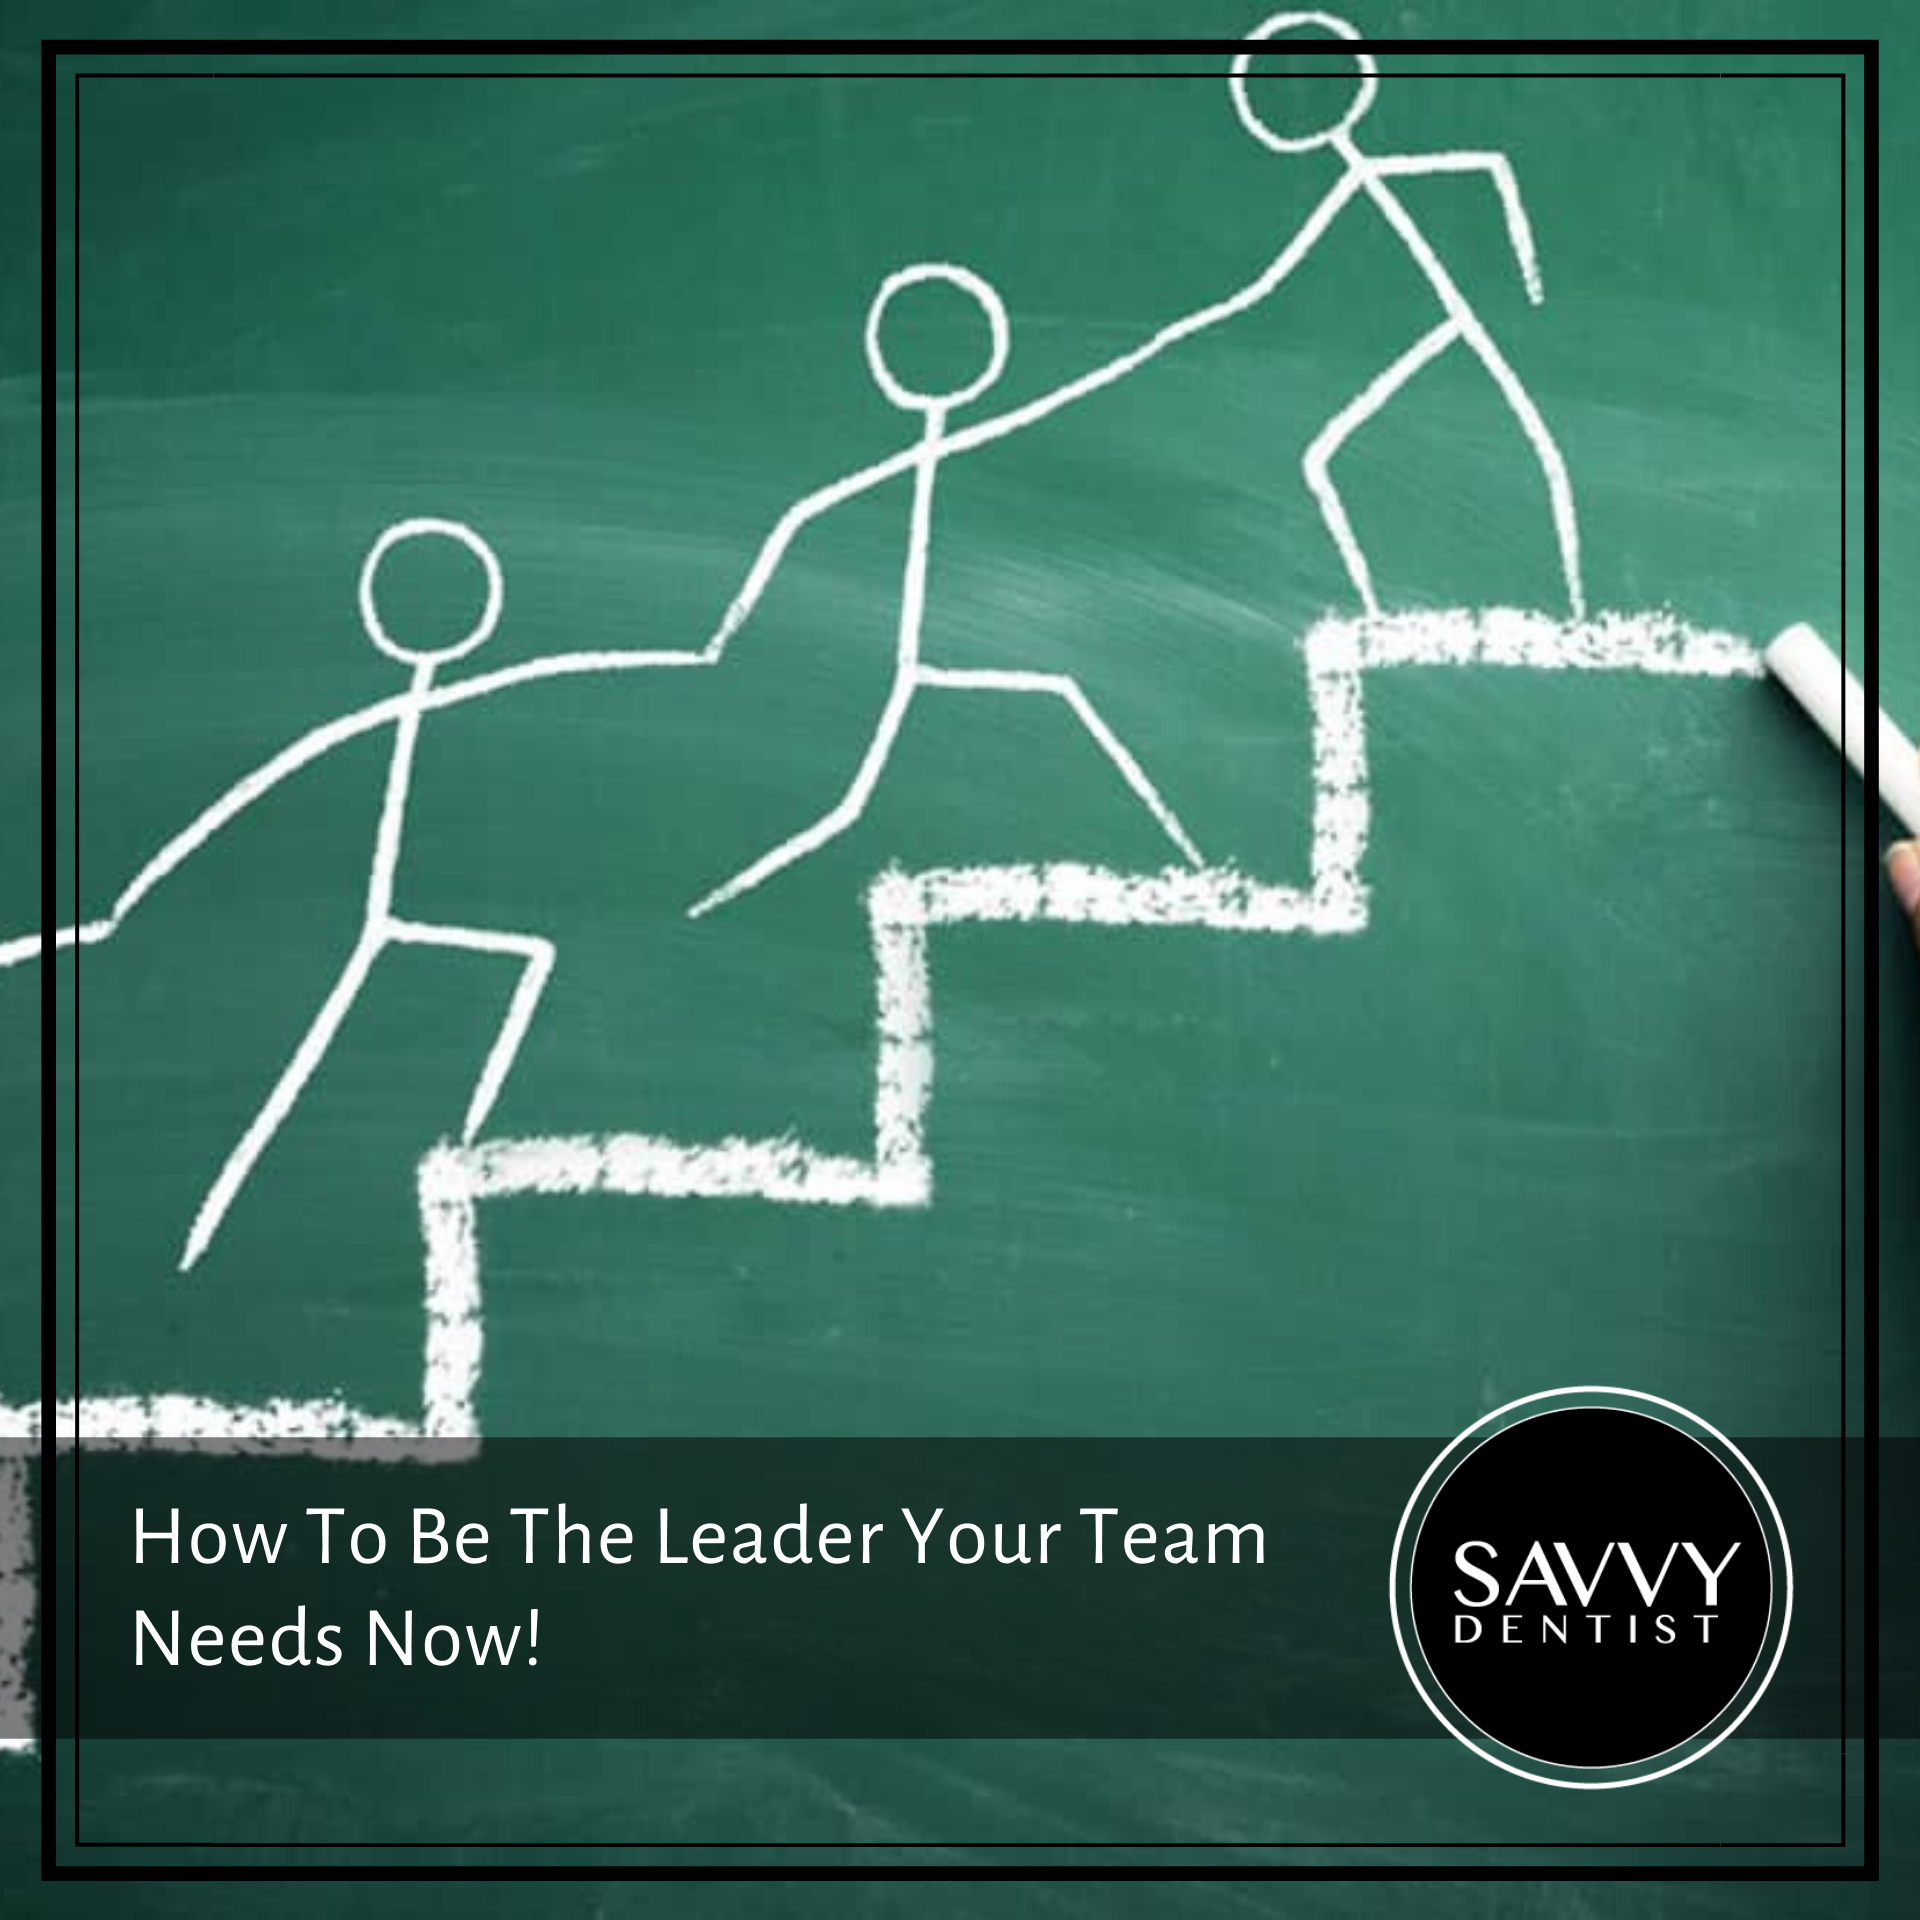 How To Be The Leader Your Team Needs Now!